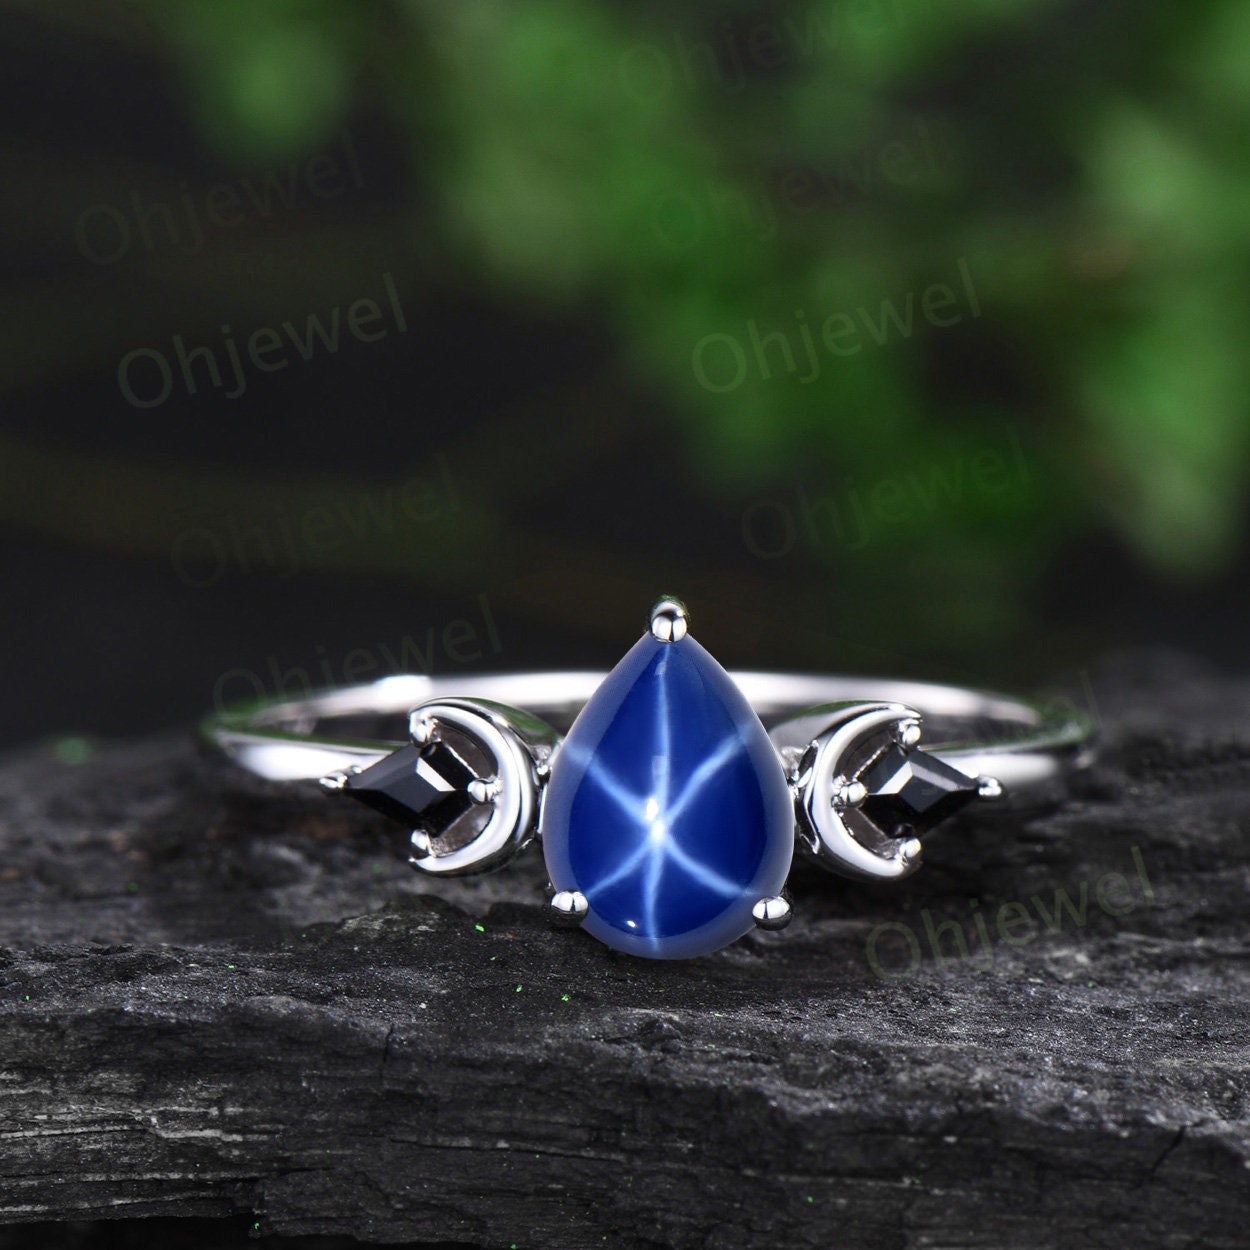 Pear shaped star sapphire ring vintage three stone kite black spinel moon ring white gold unique engagement ring antique bridal set women